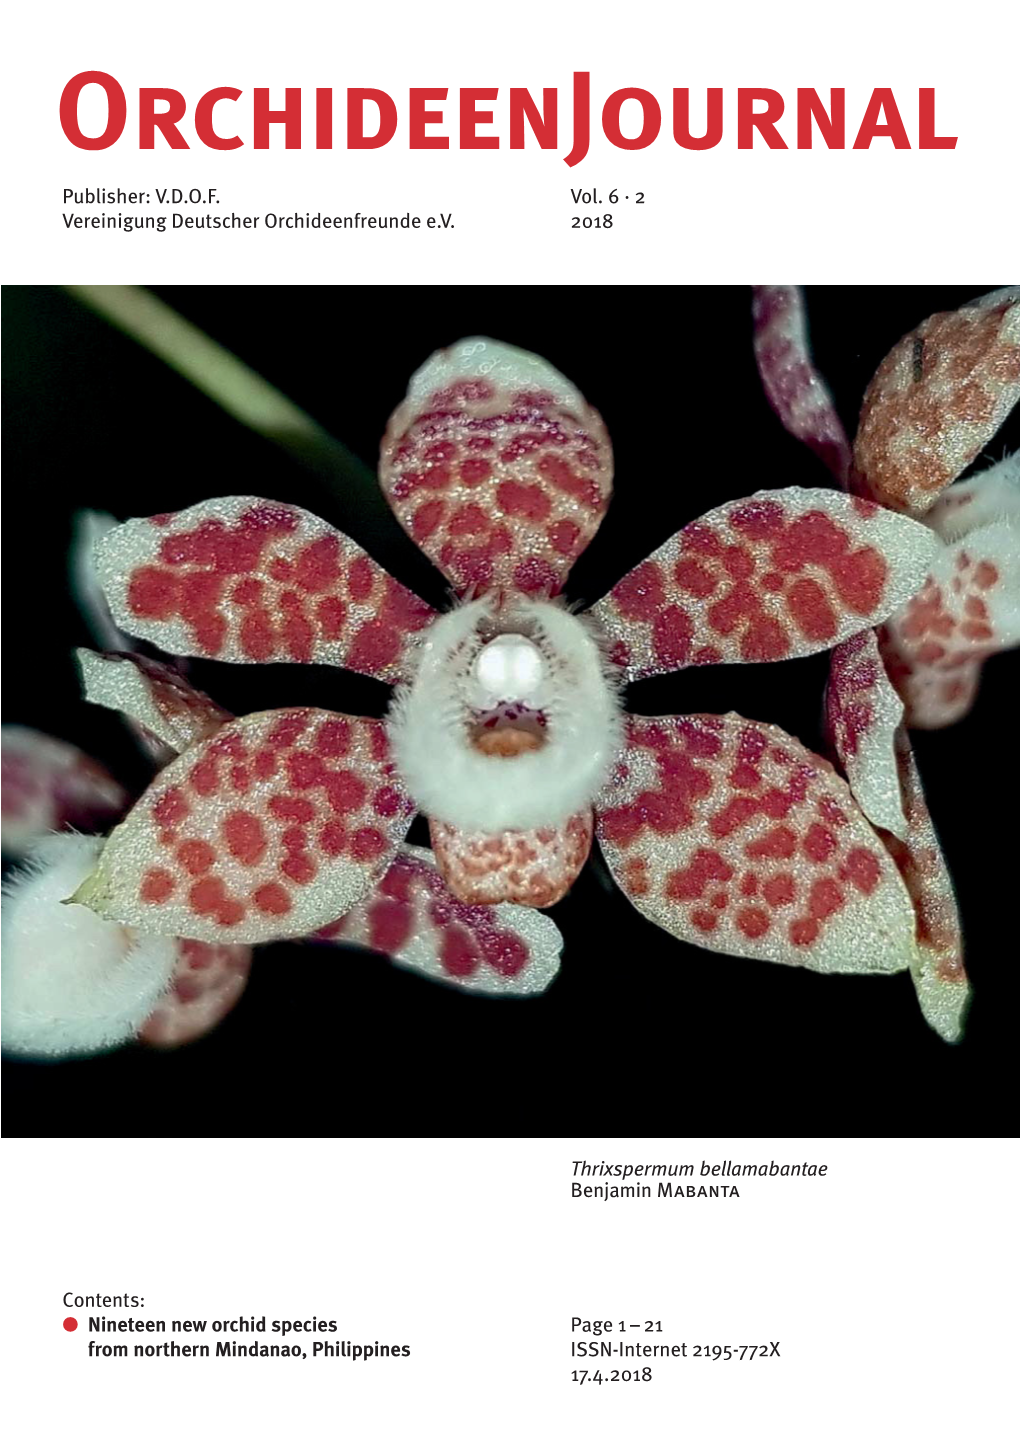 Nineteen New Orchid Species from Northern Mindanao, Philippines